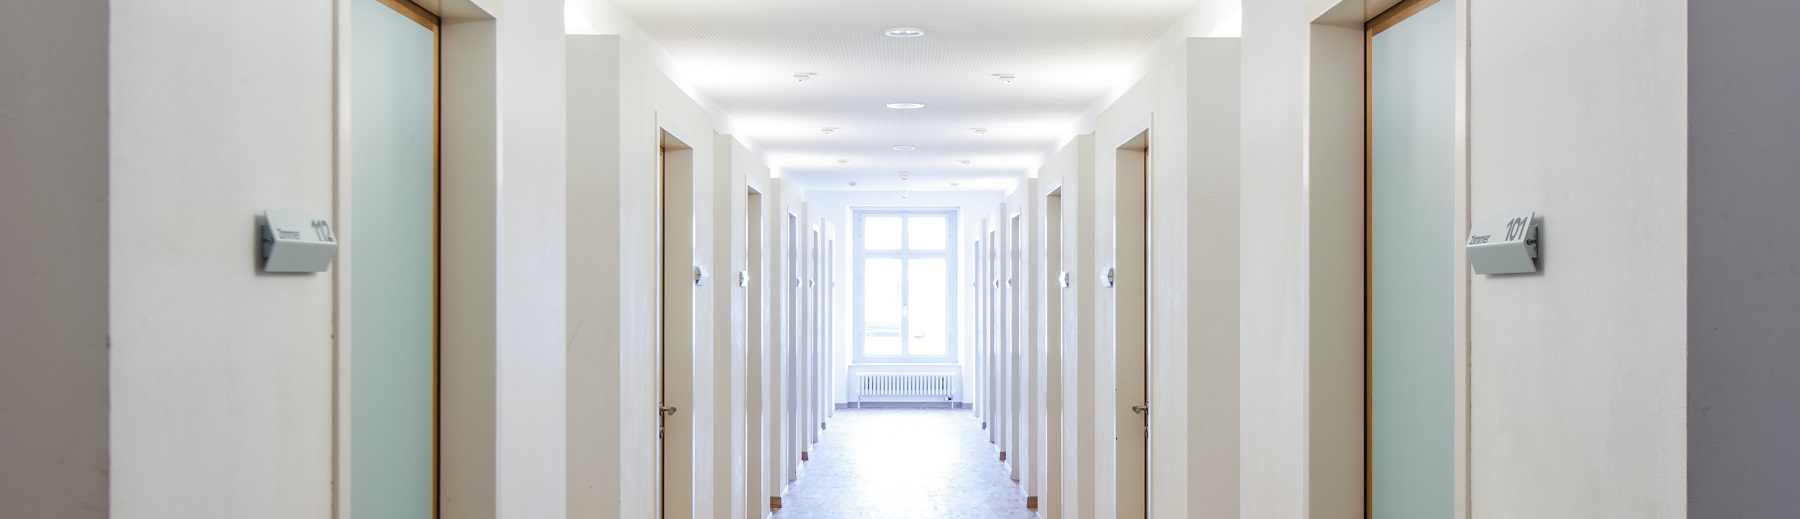 A hallway with many doors in a dormitory or hotel